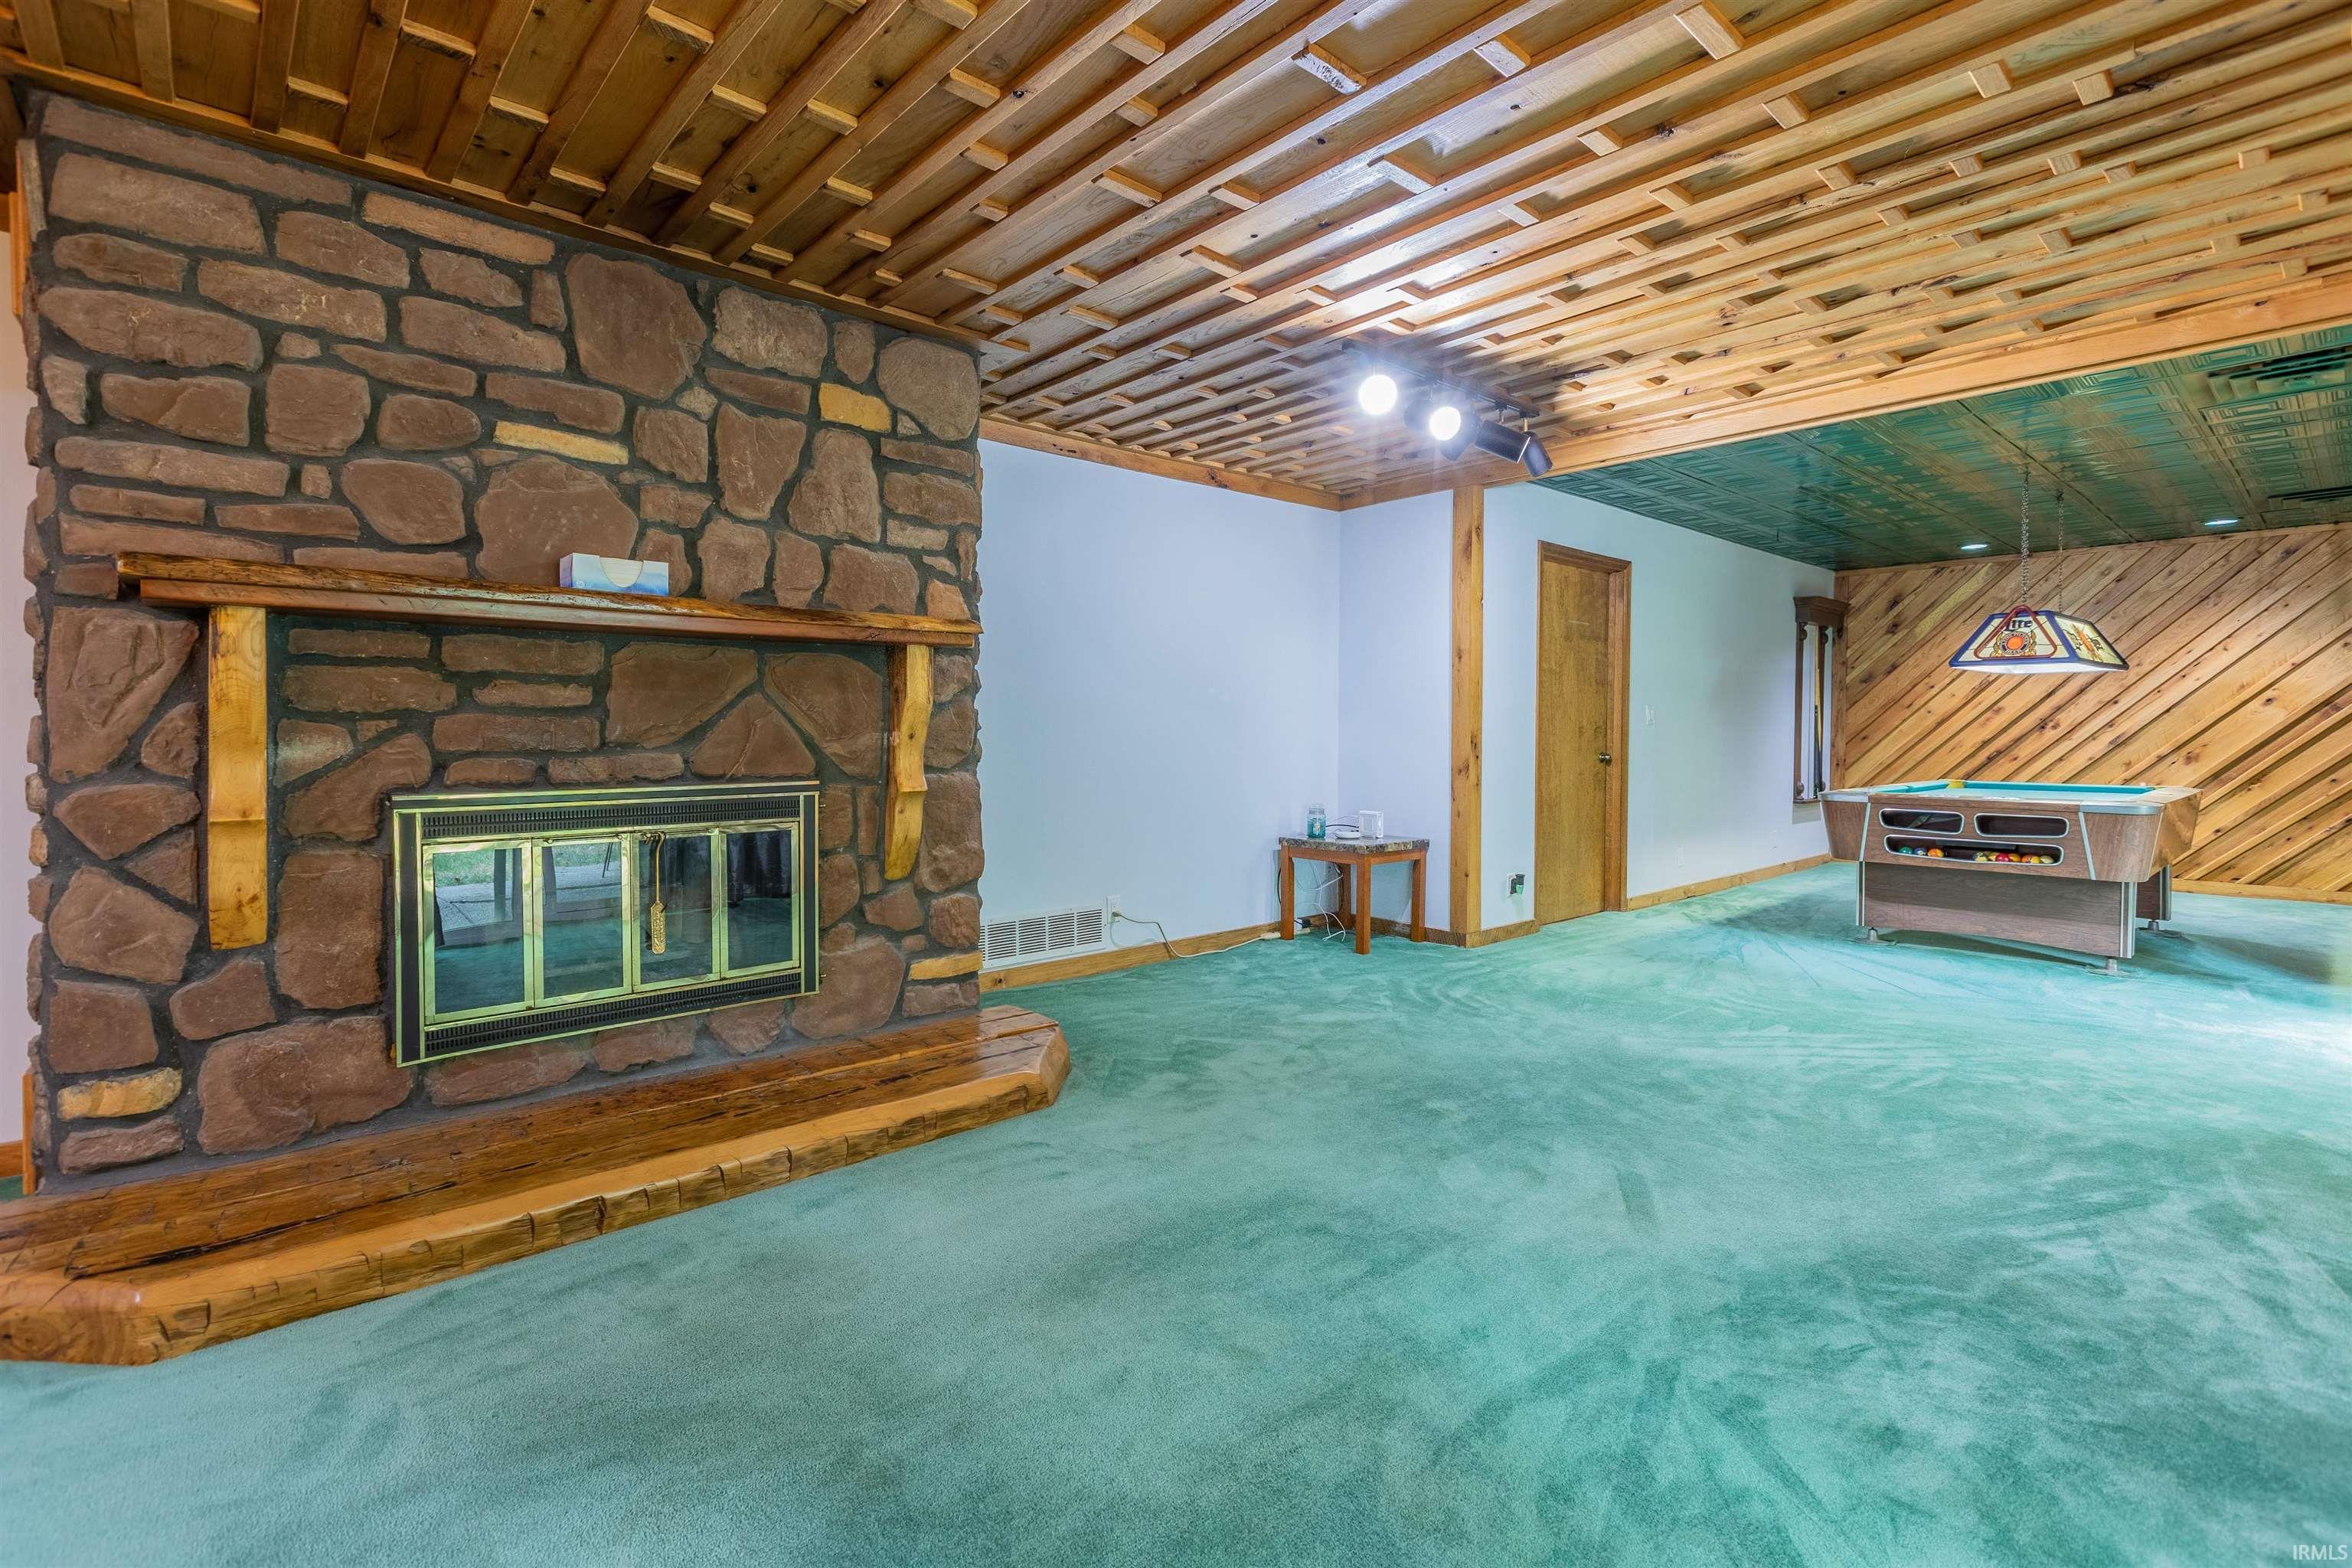 2nd fireplace in basement